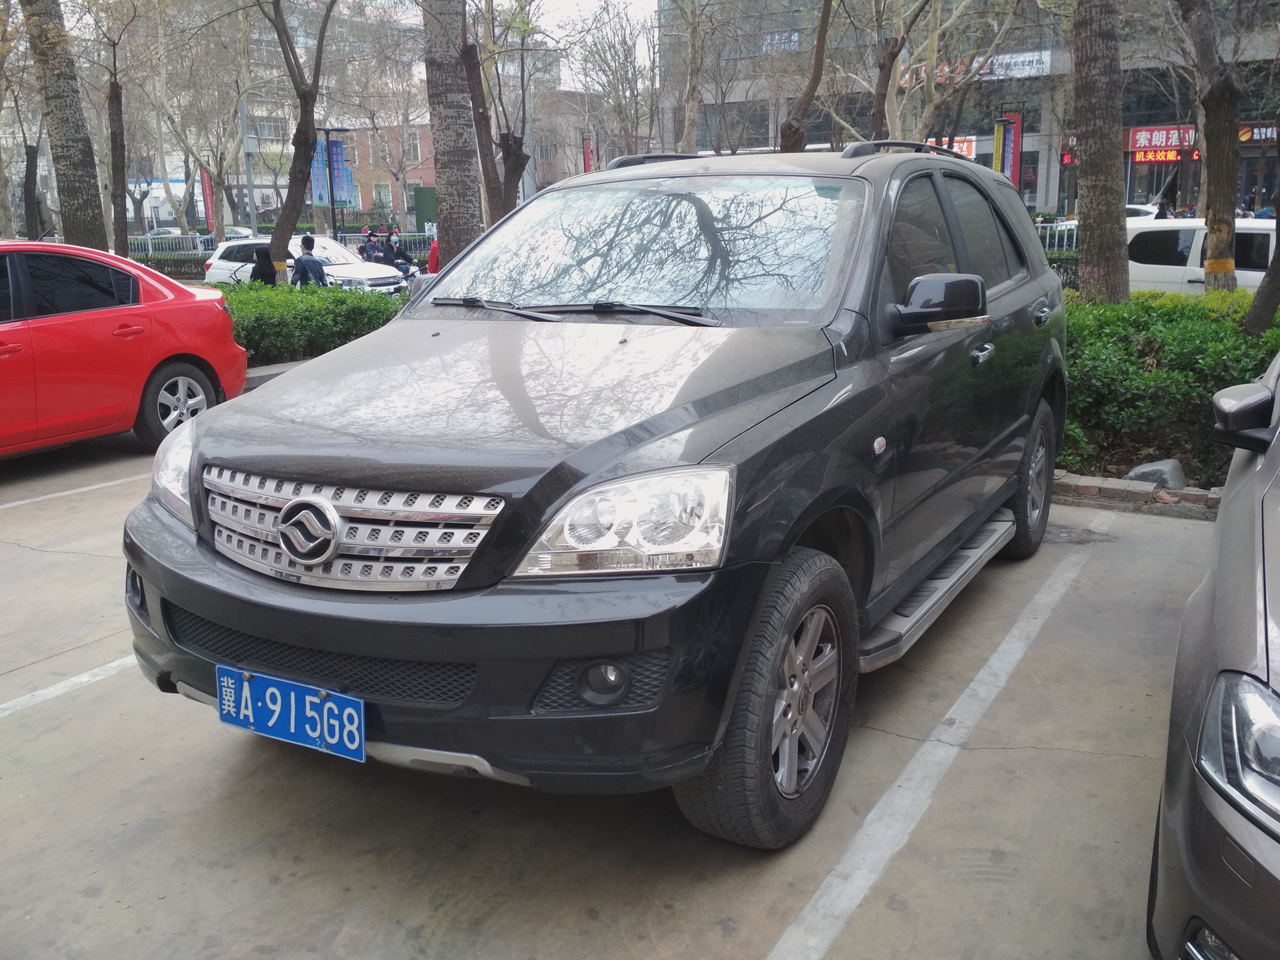 Auto fakes and auto crafts - My, Auto, Chinese car industry, China, China inside out, Fake, Imitation, UAZ-469, Donkey, , Cab, Foreign cars, Longpost